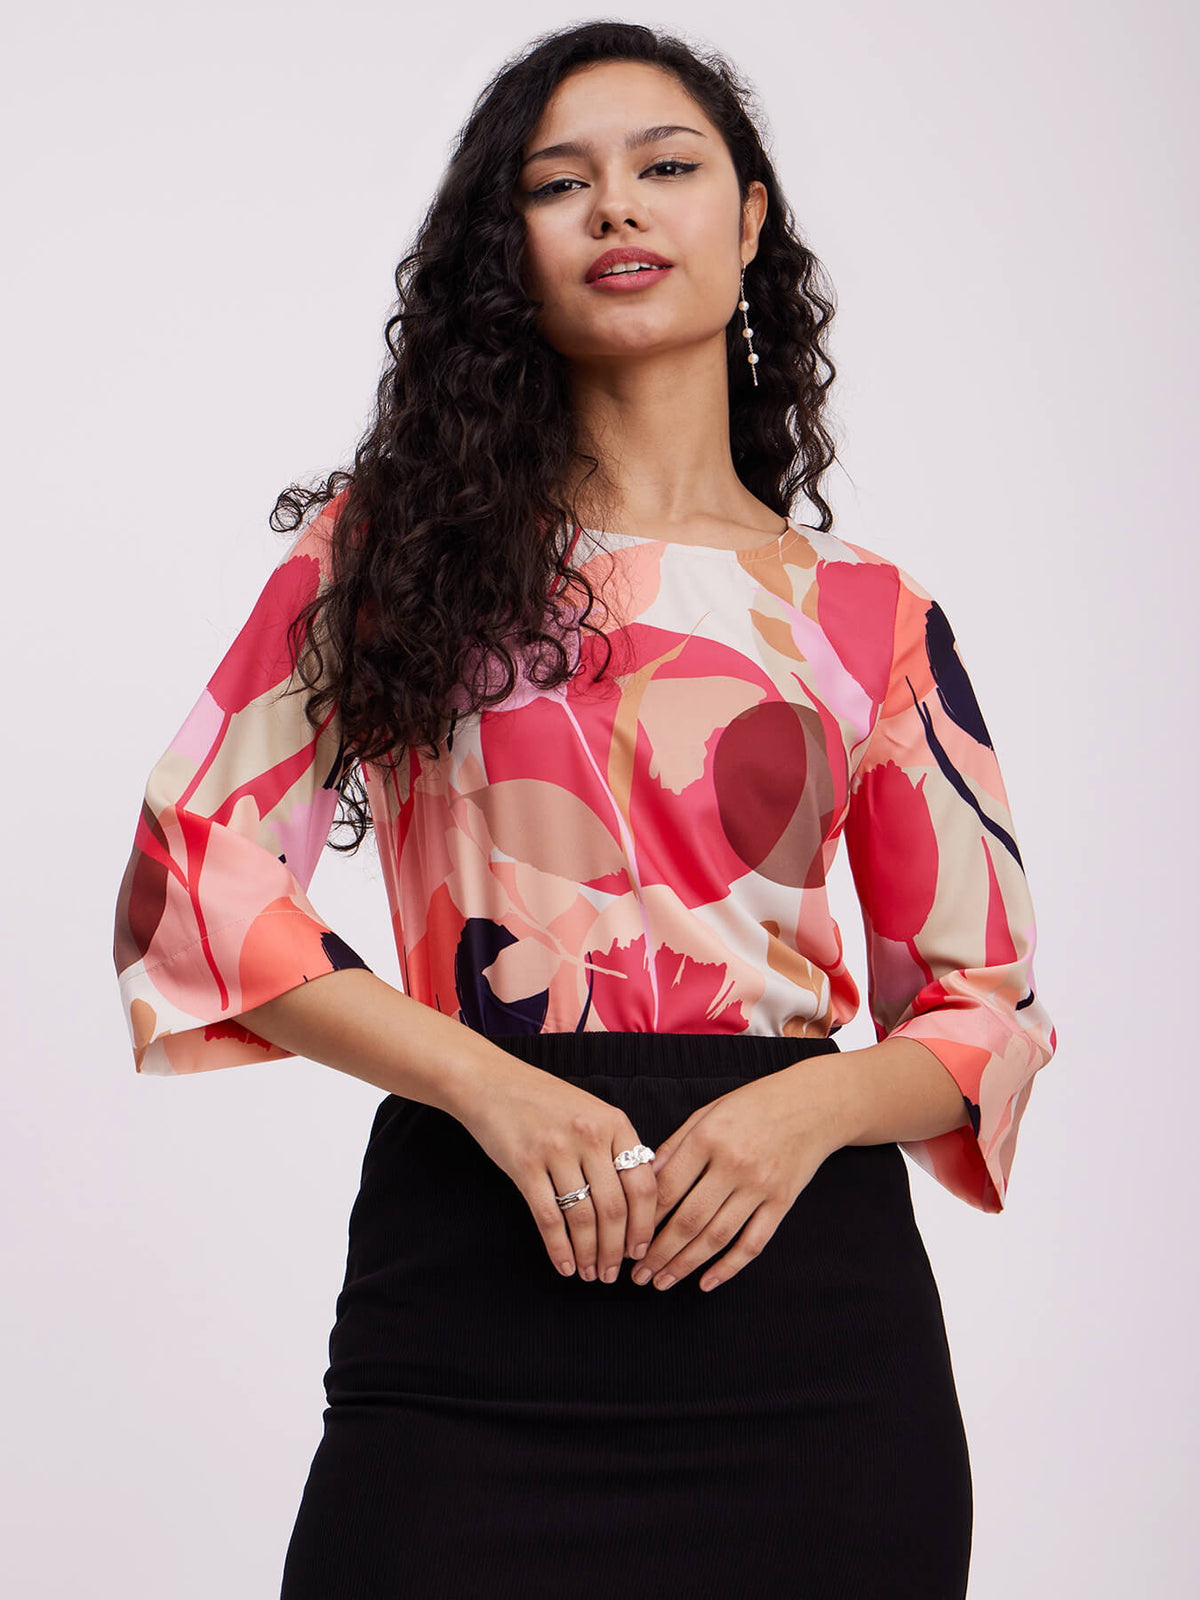 Floral Print Bell Sleeves Top - Multicolour